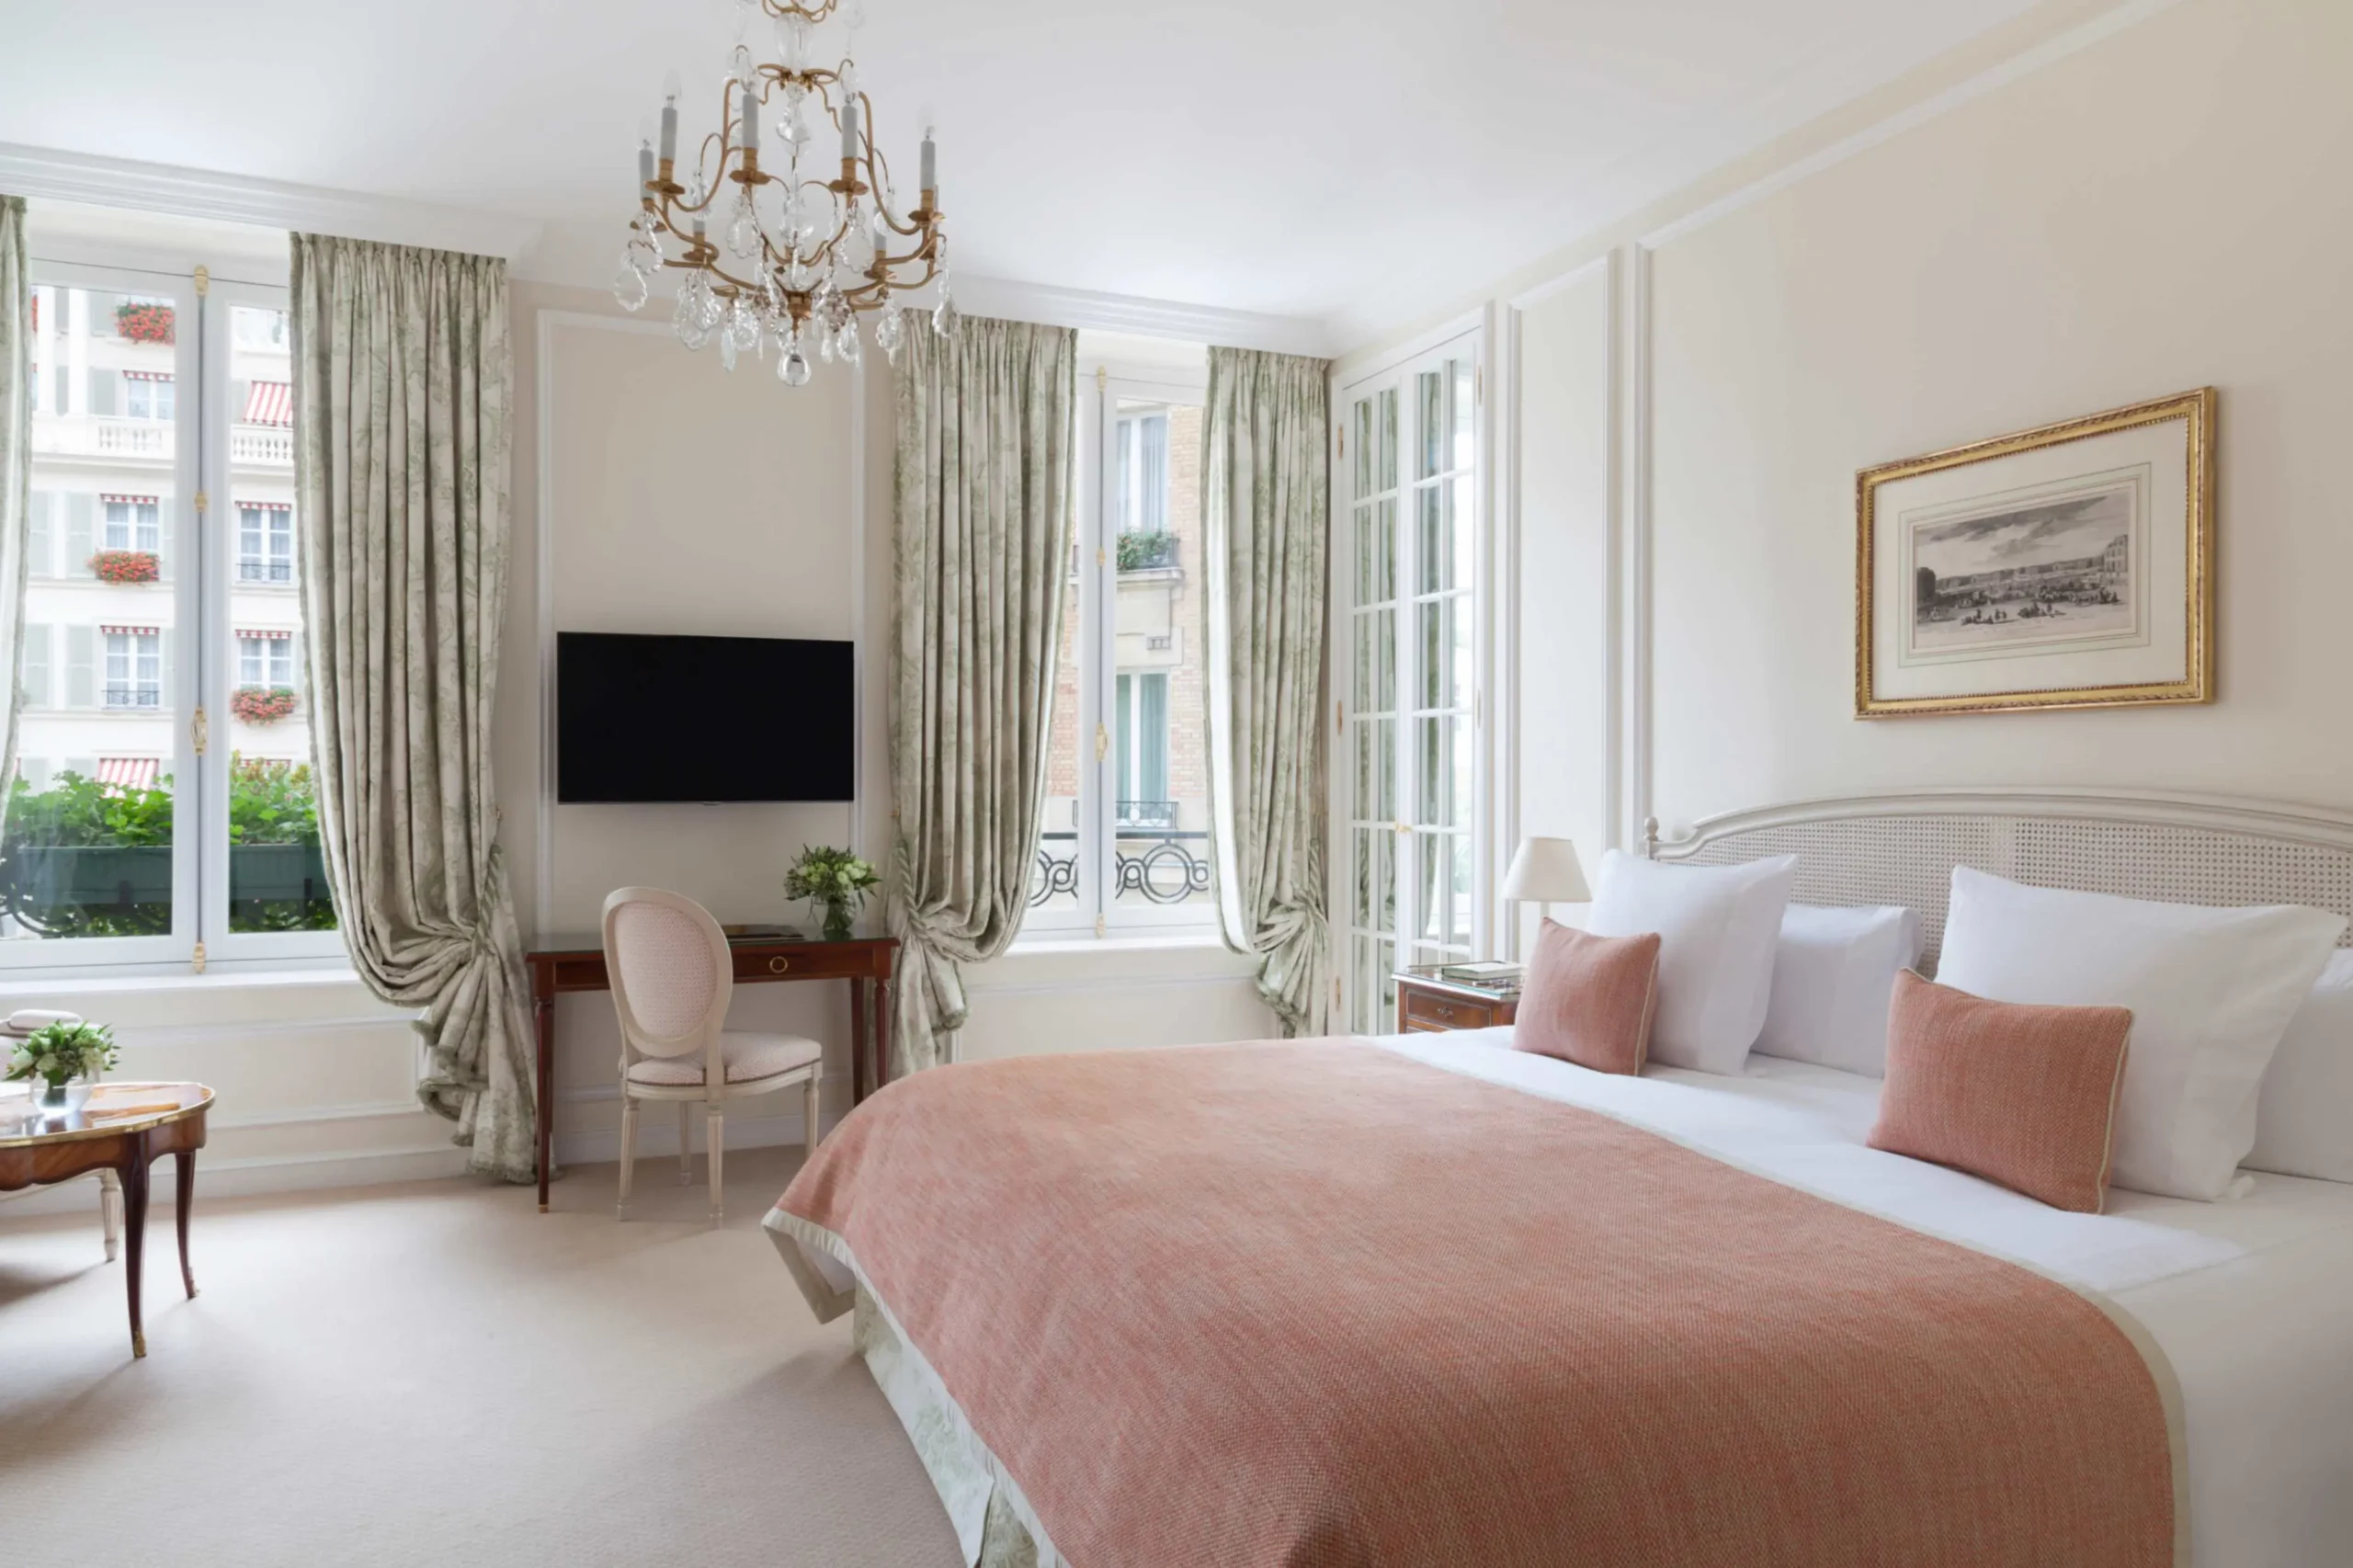 Elegant guest room at Le Bristol Paris, an eco-friendly hotel in Paris, featuring a deluxe-sized bed with crisp blush linens, classic French windows that open to a lush view, and a crystal chandelier adding a touch of luxury.